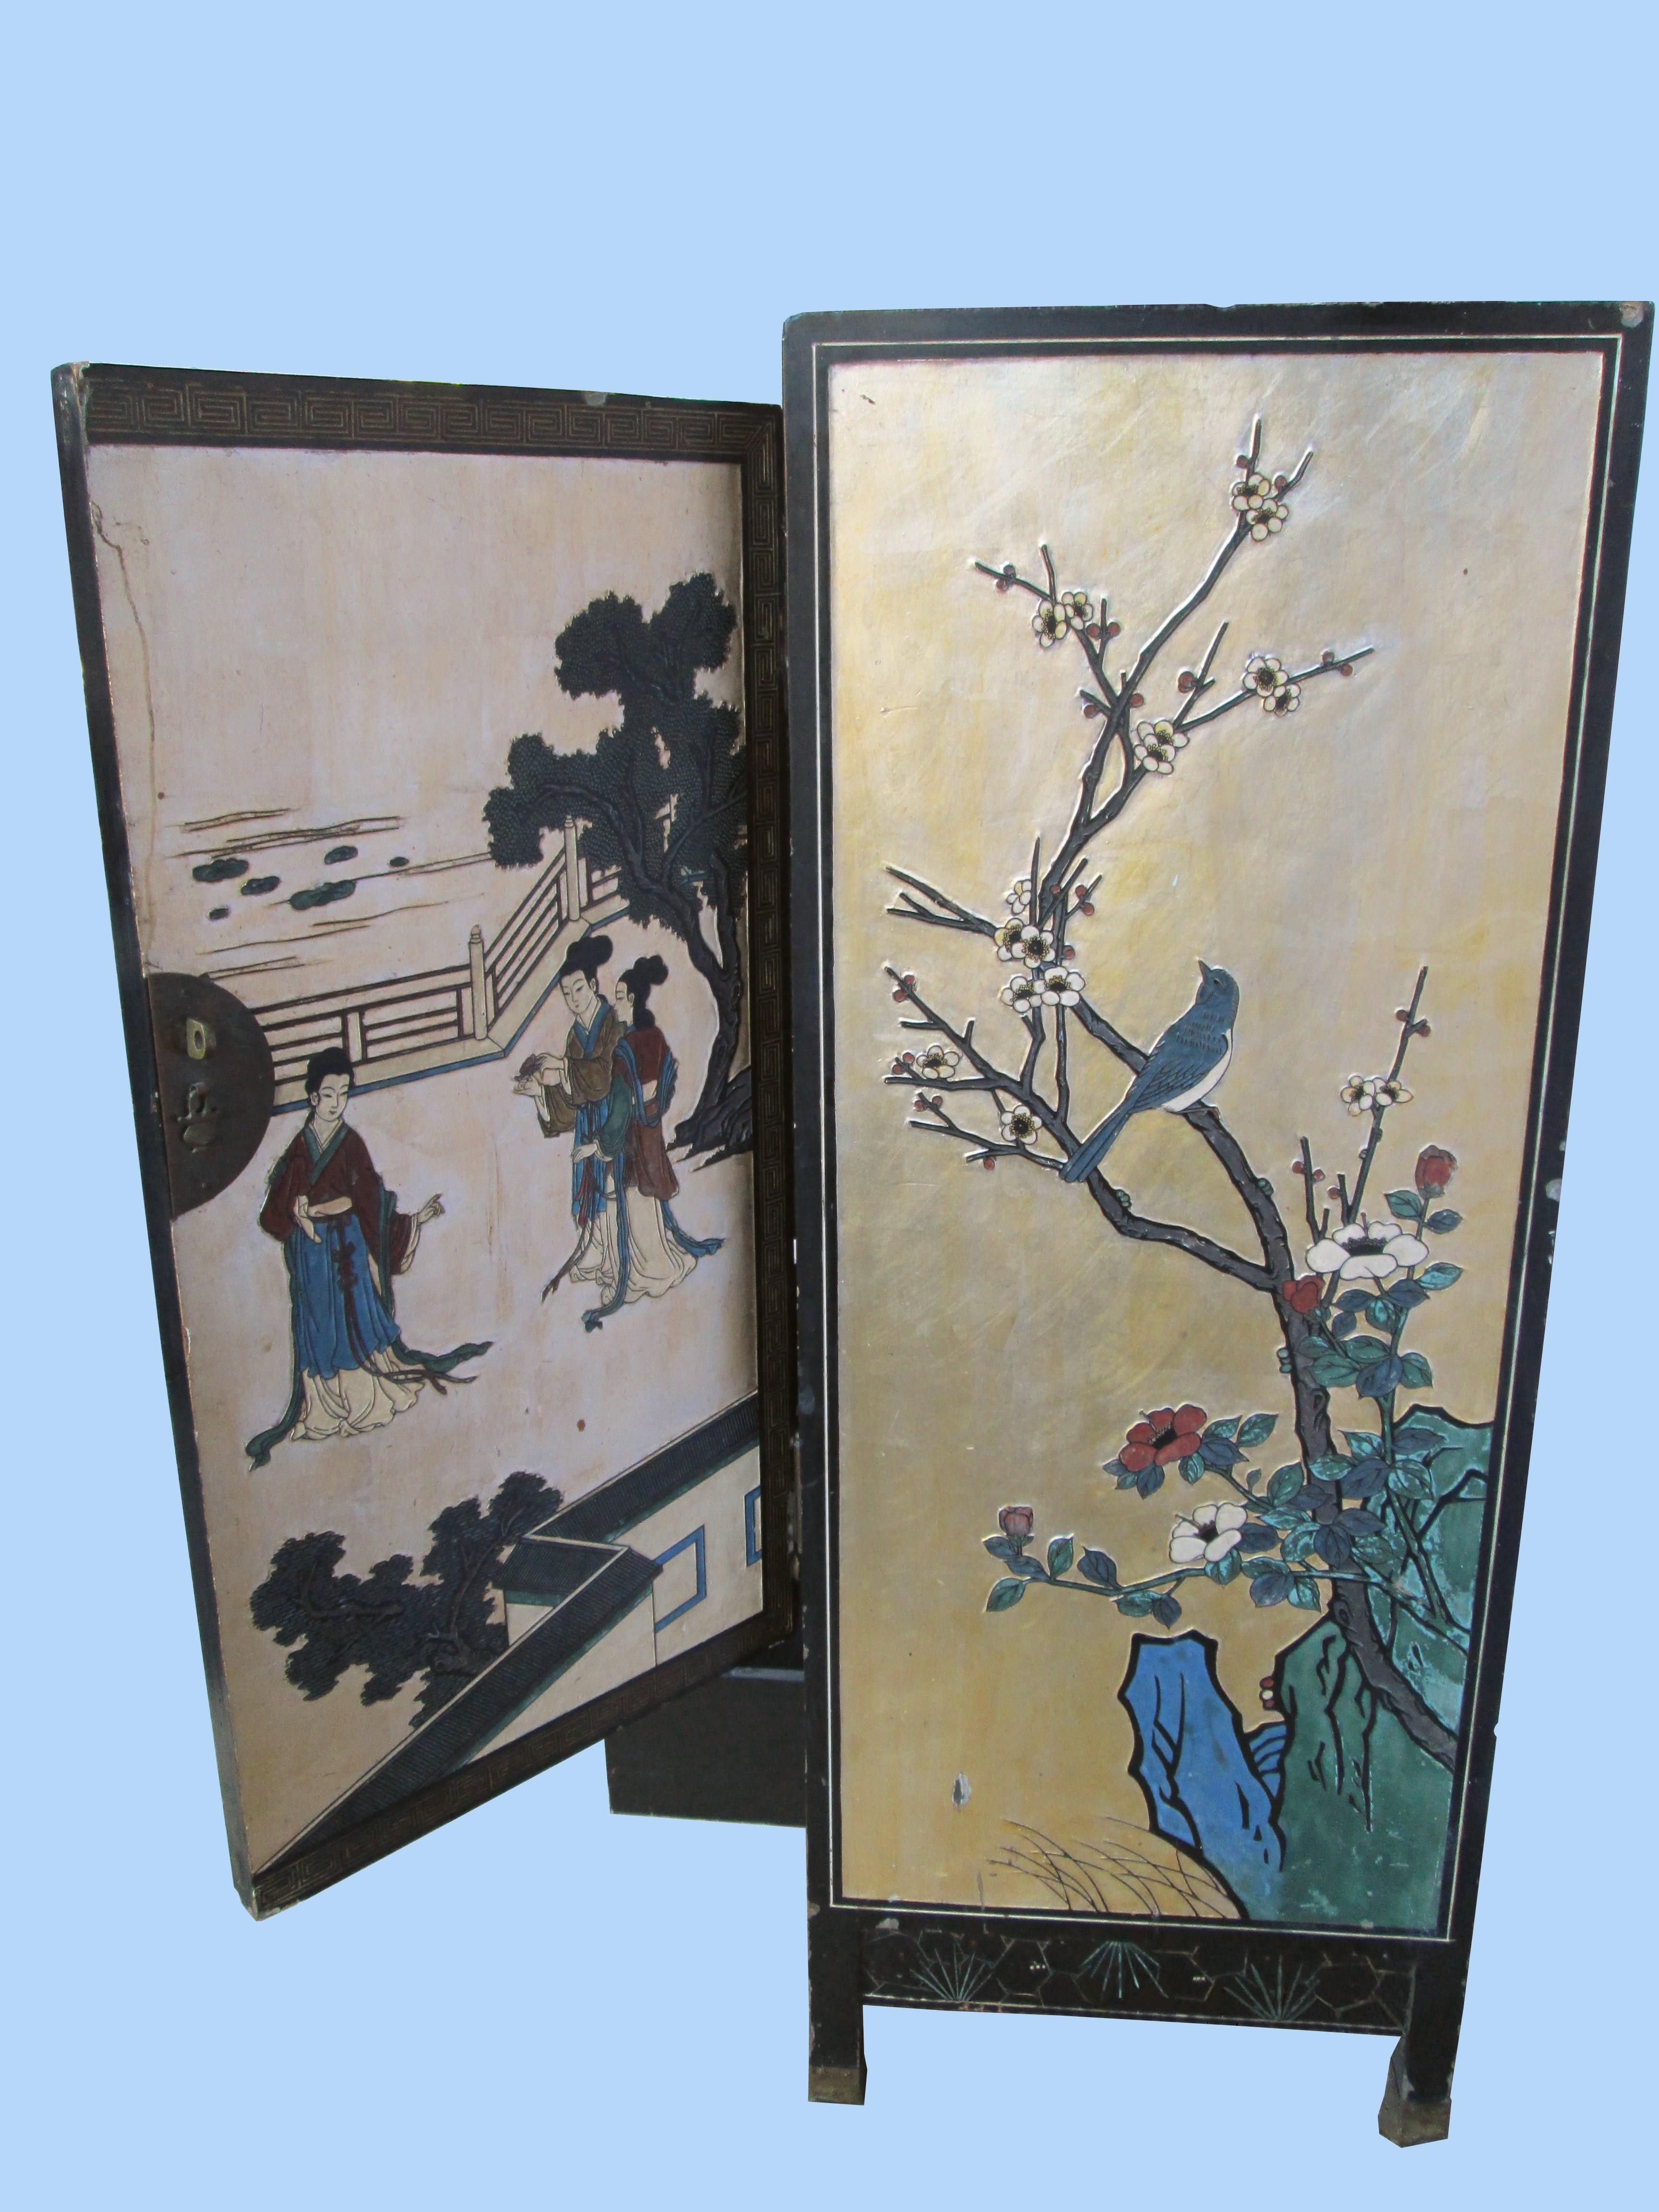 The handcrafting, gilt painting and sculptural elements make this cabinet somewhat breathtaking in different lights. The kimono-clad figures are graceful and the gold background palette set in a garden creates a tranquil and elegant scene. The